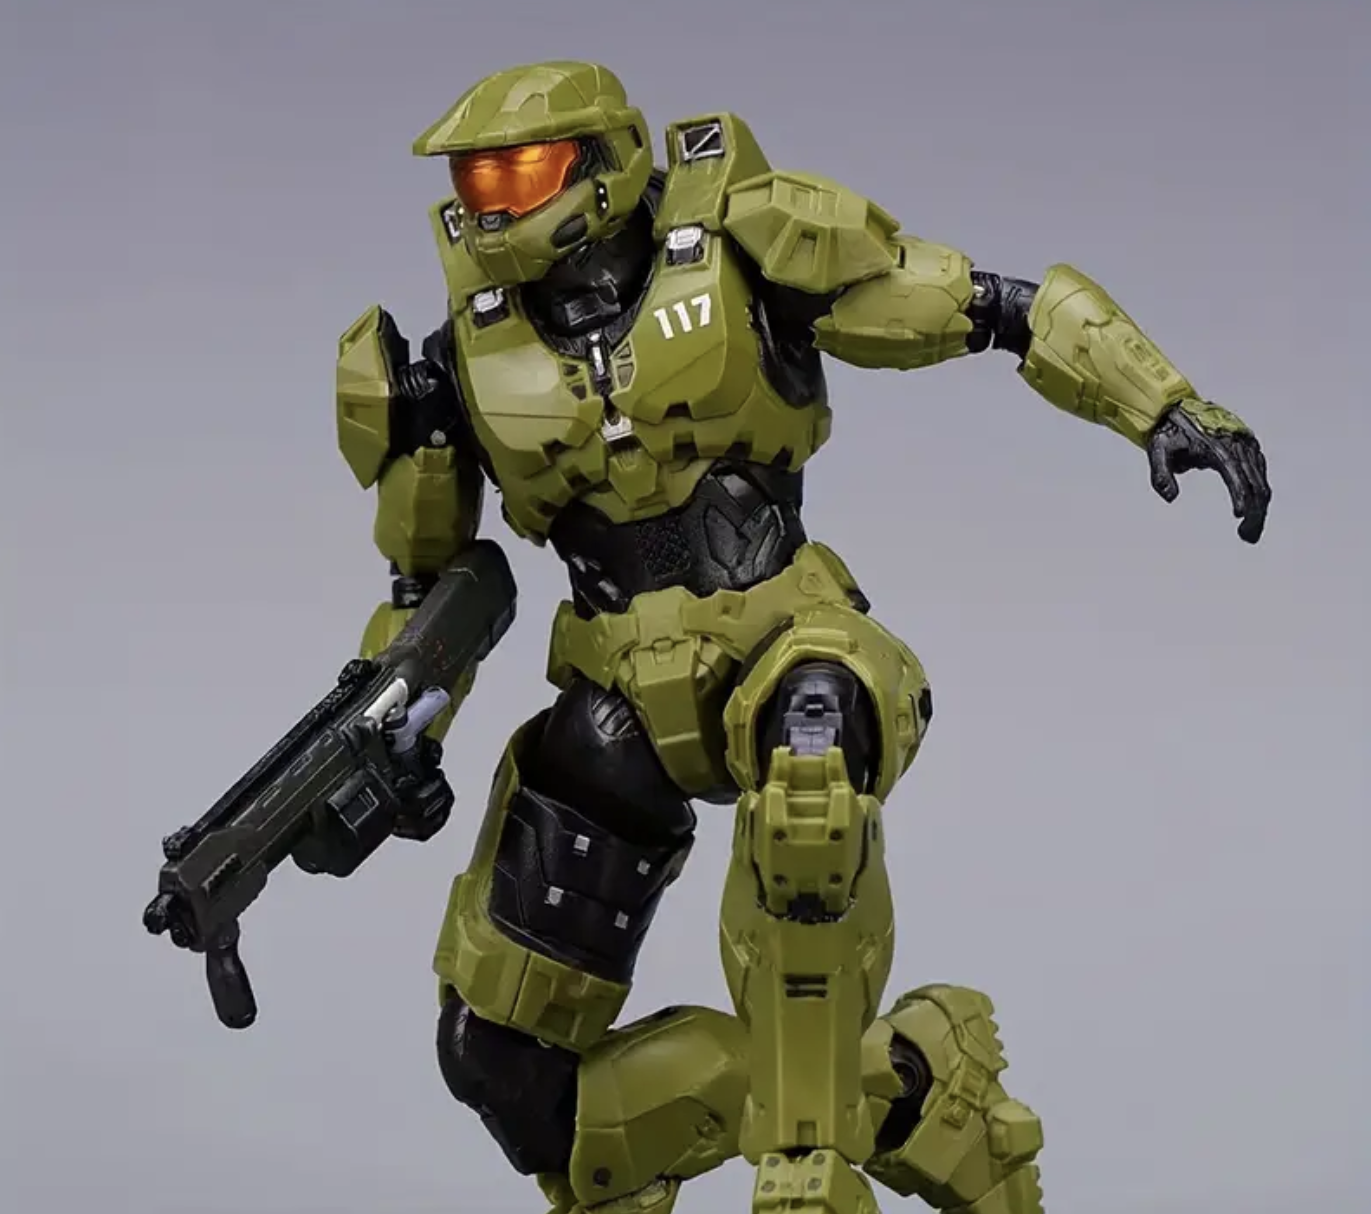 Halo Master Chief Action Figure